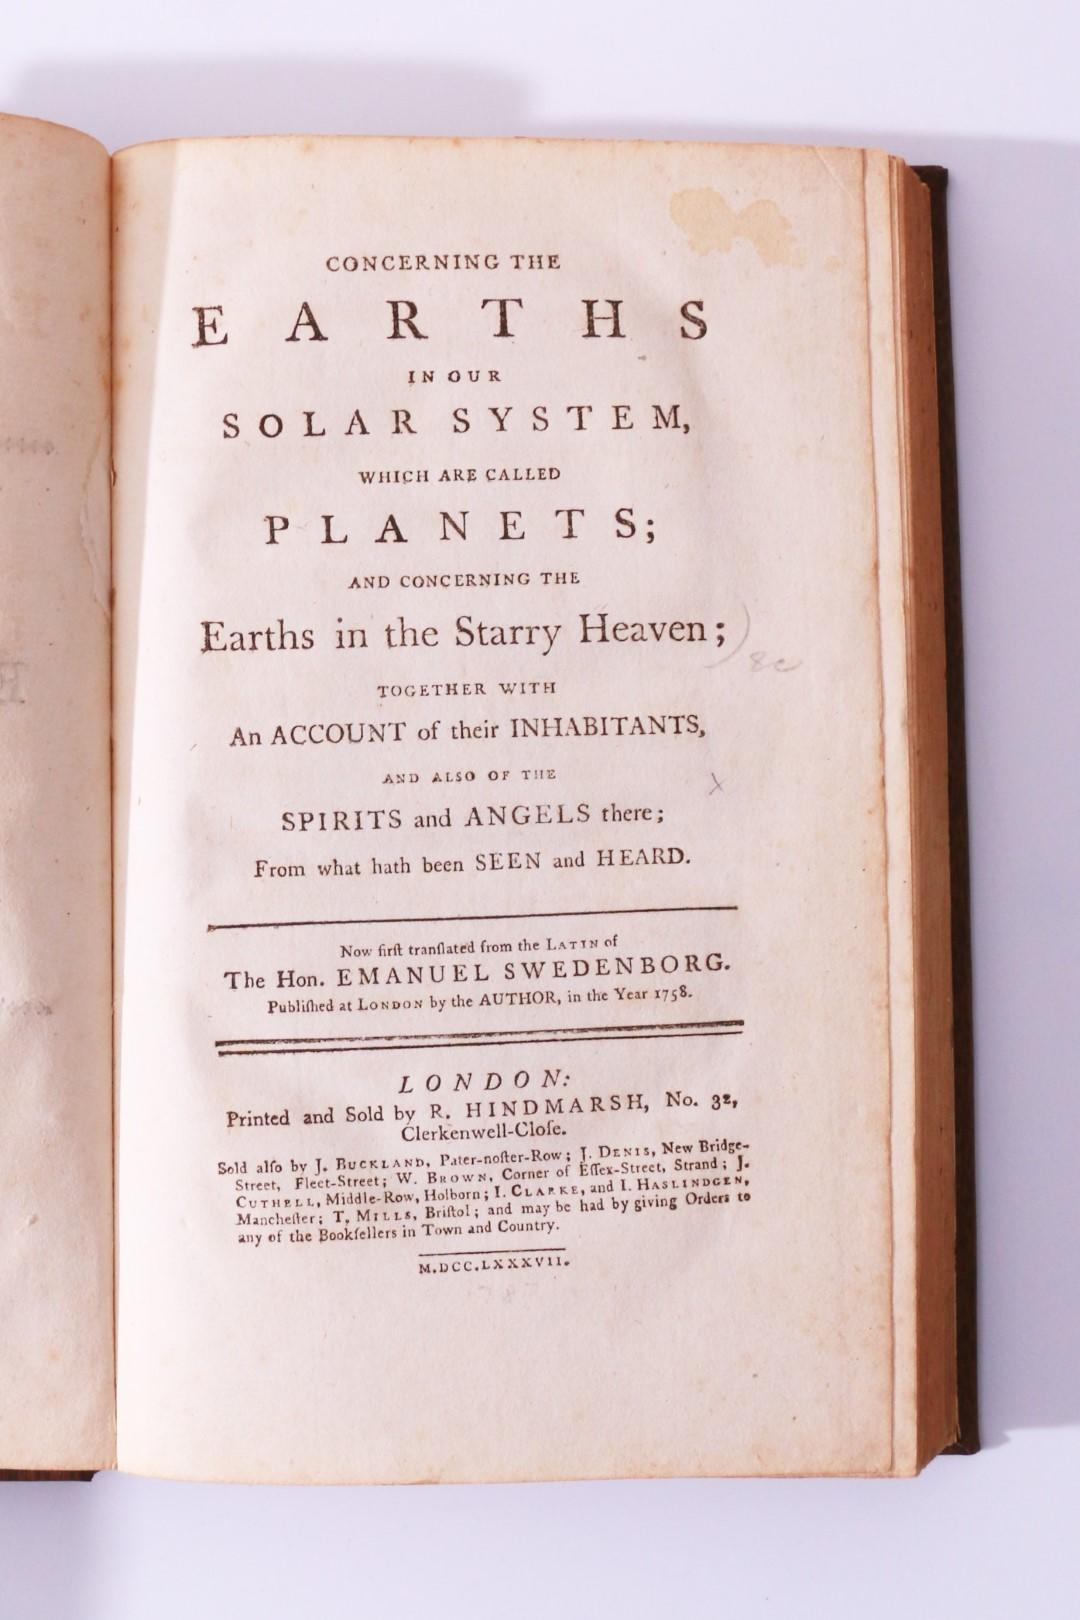 Emanuel Swedenborg - Concerning Earths in our Solar System, Which are called Planets and Concerning the Earths in the Starry Heaven; Together with An Account of their Inhabitants, and also of the Spirits and Angels there; From what hath been Seen and Heard. - R. Hindmarsh, 1787, First Edition.